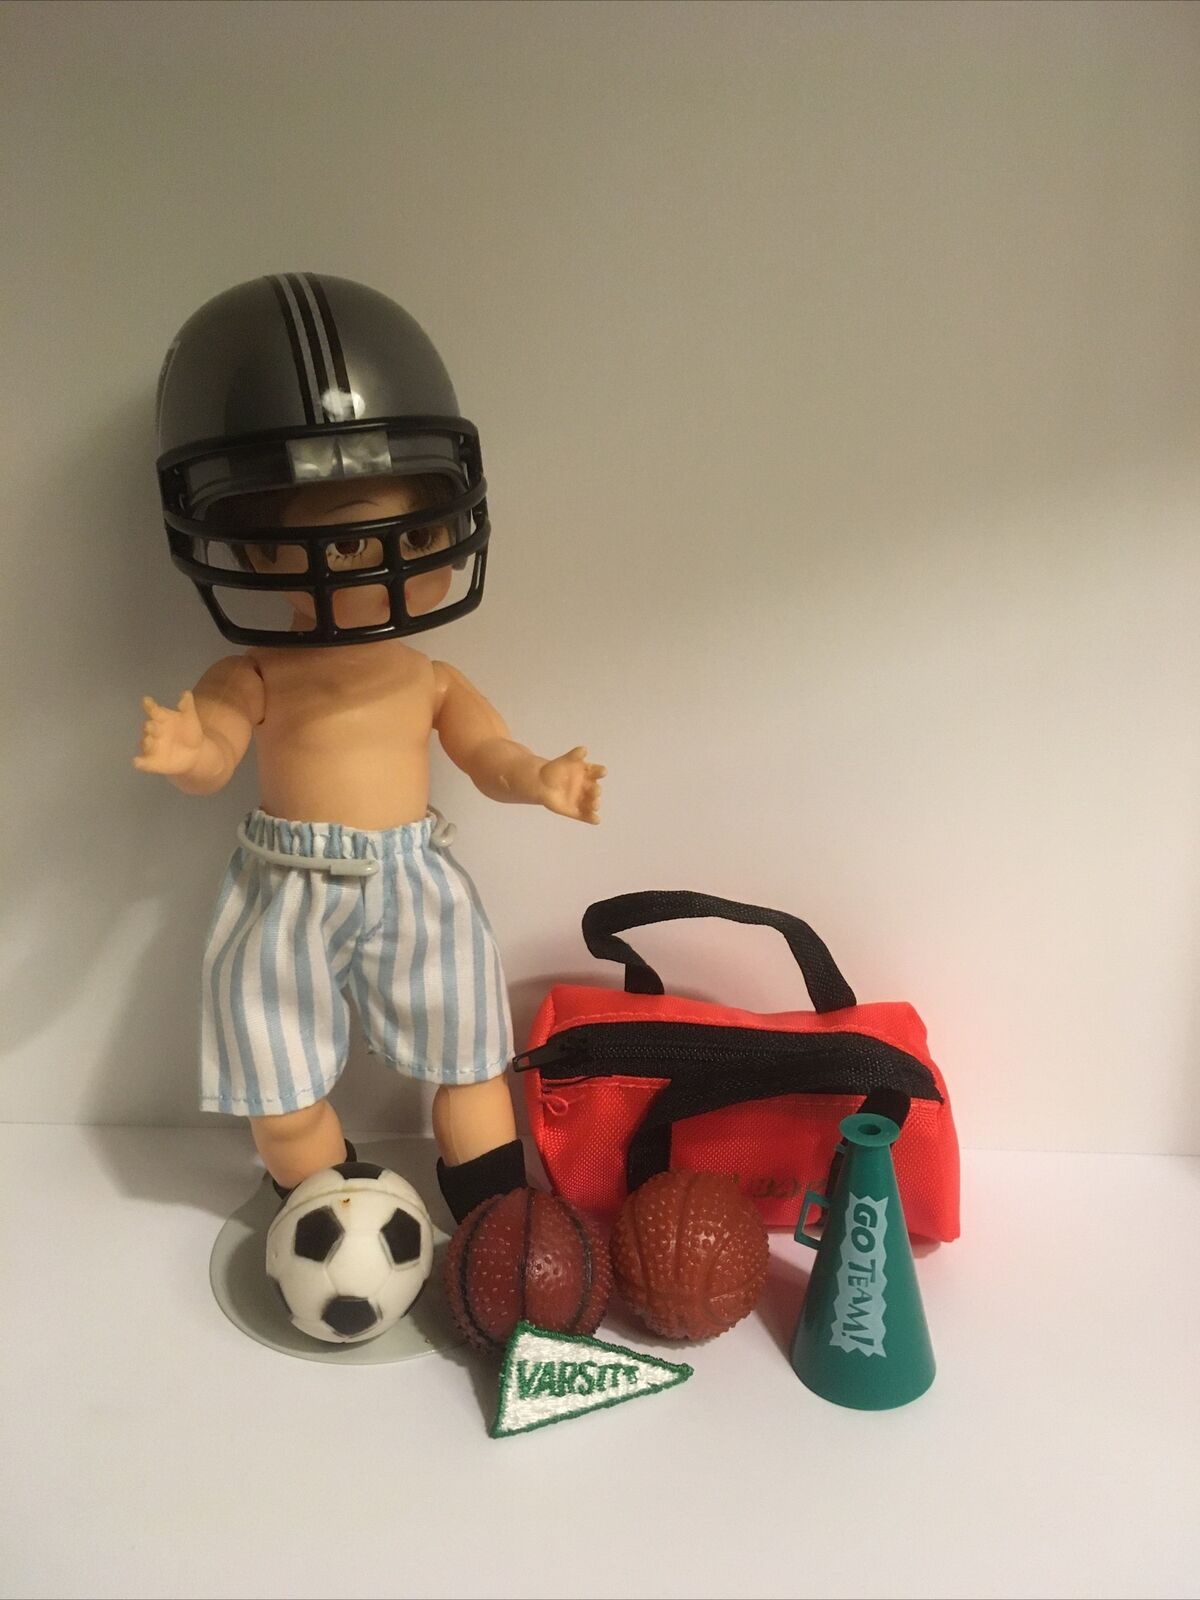 Great for Madame Alexander 8” dolls sports equipment